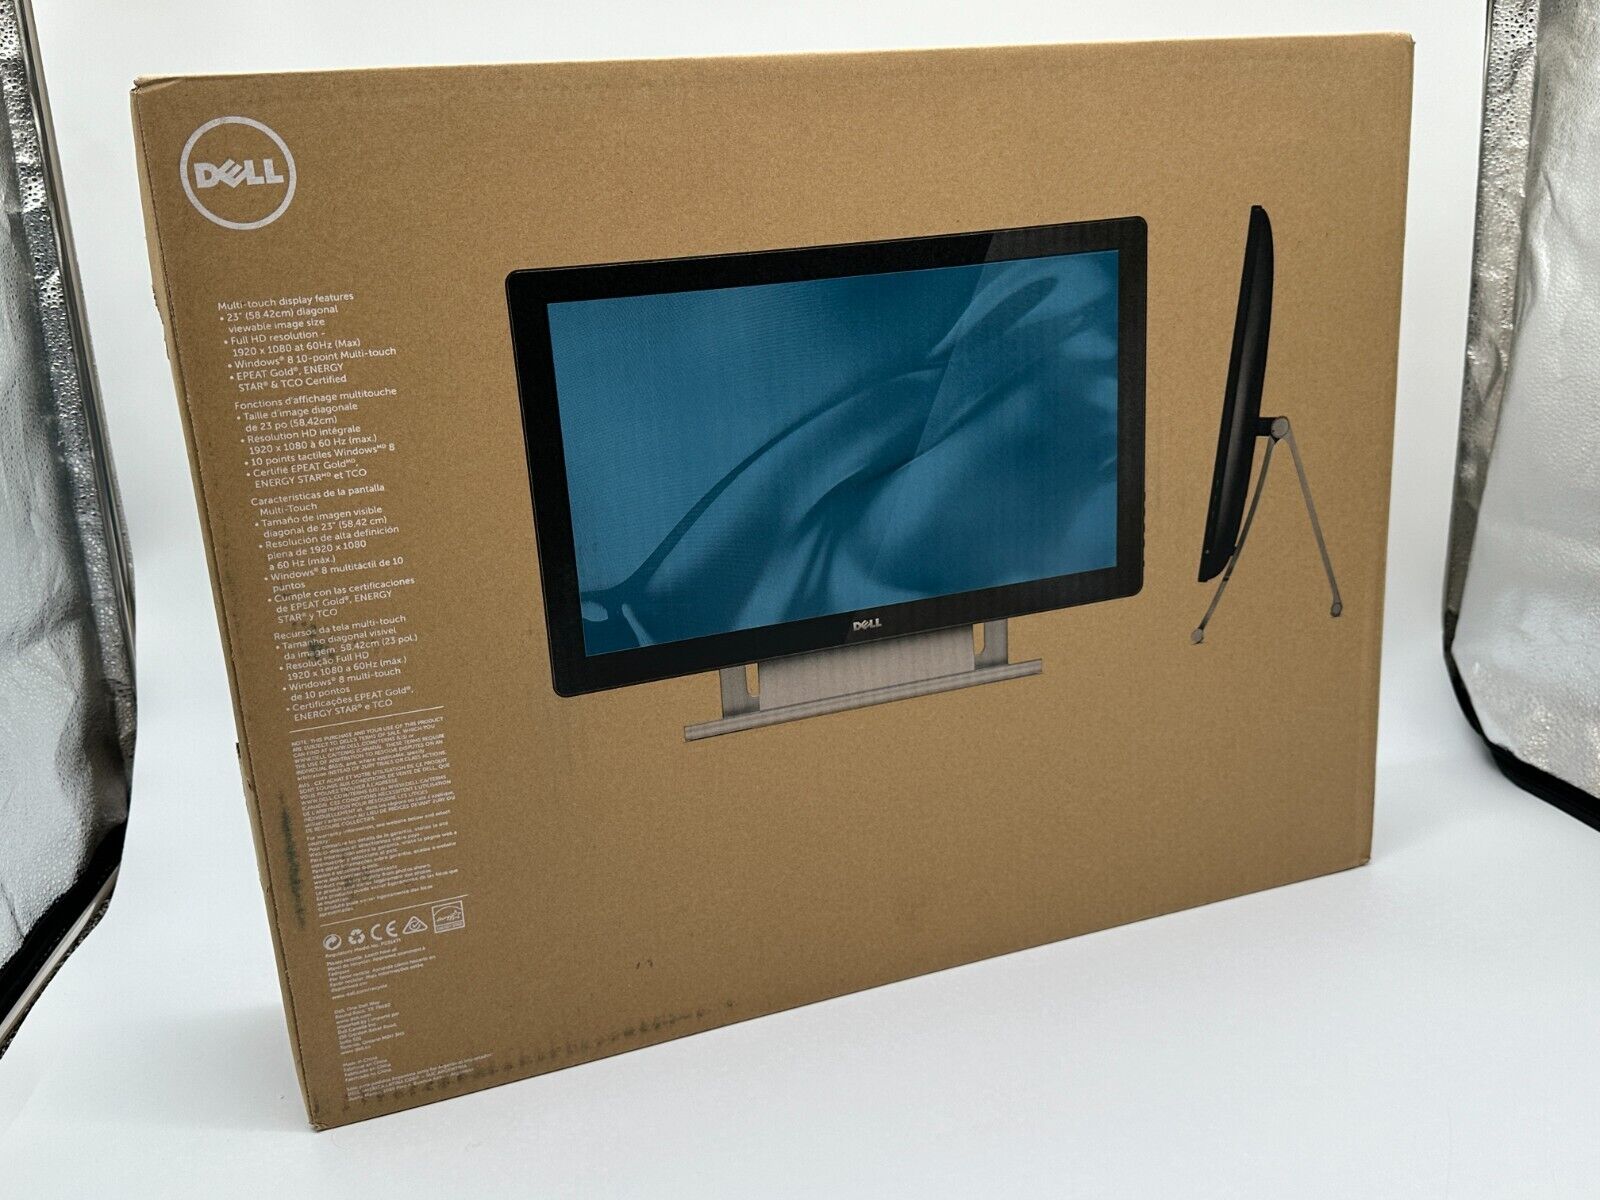 Dell P P2314T 23 inch Widescreen LED Backlight Monitor NEW SEALED